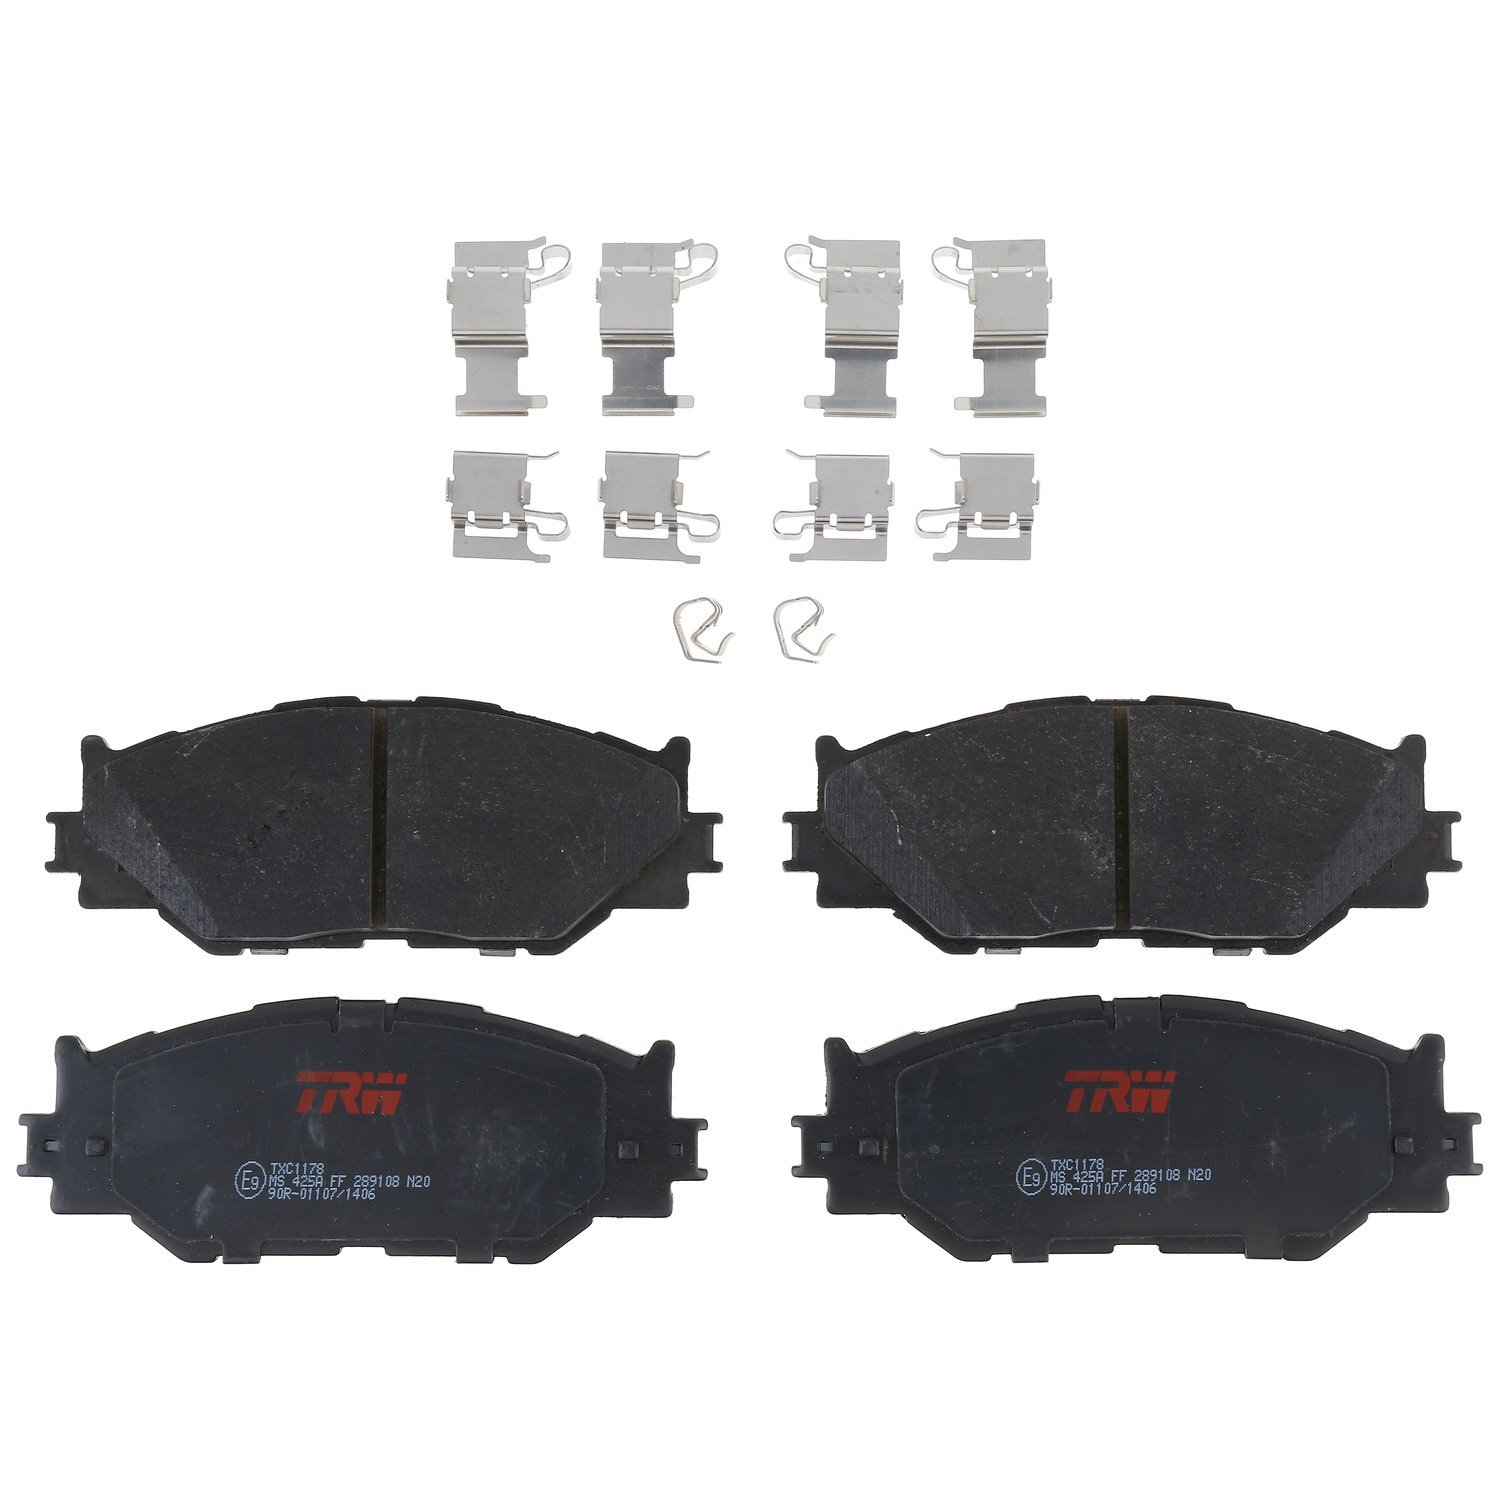 TXC1178 Ultra-Series Disc Brake Pad Set for Lexus IS250 2008-2006, IS250 2015-2014, Position: Front